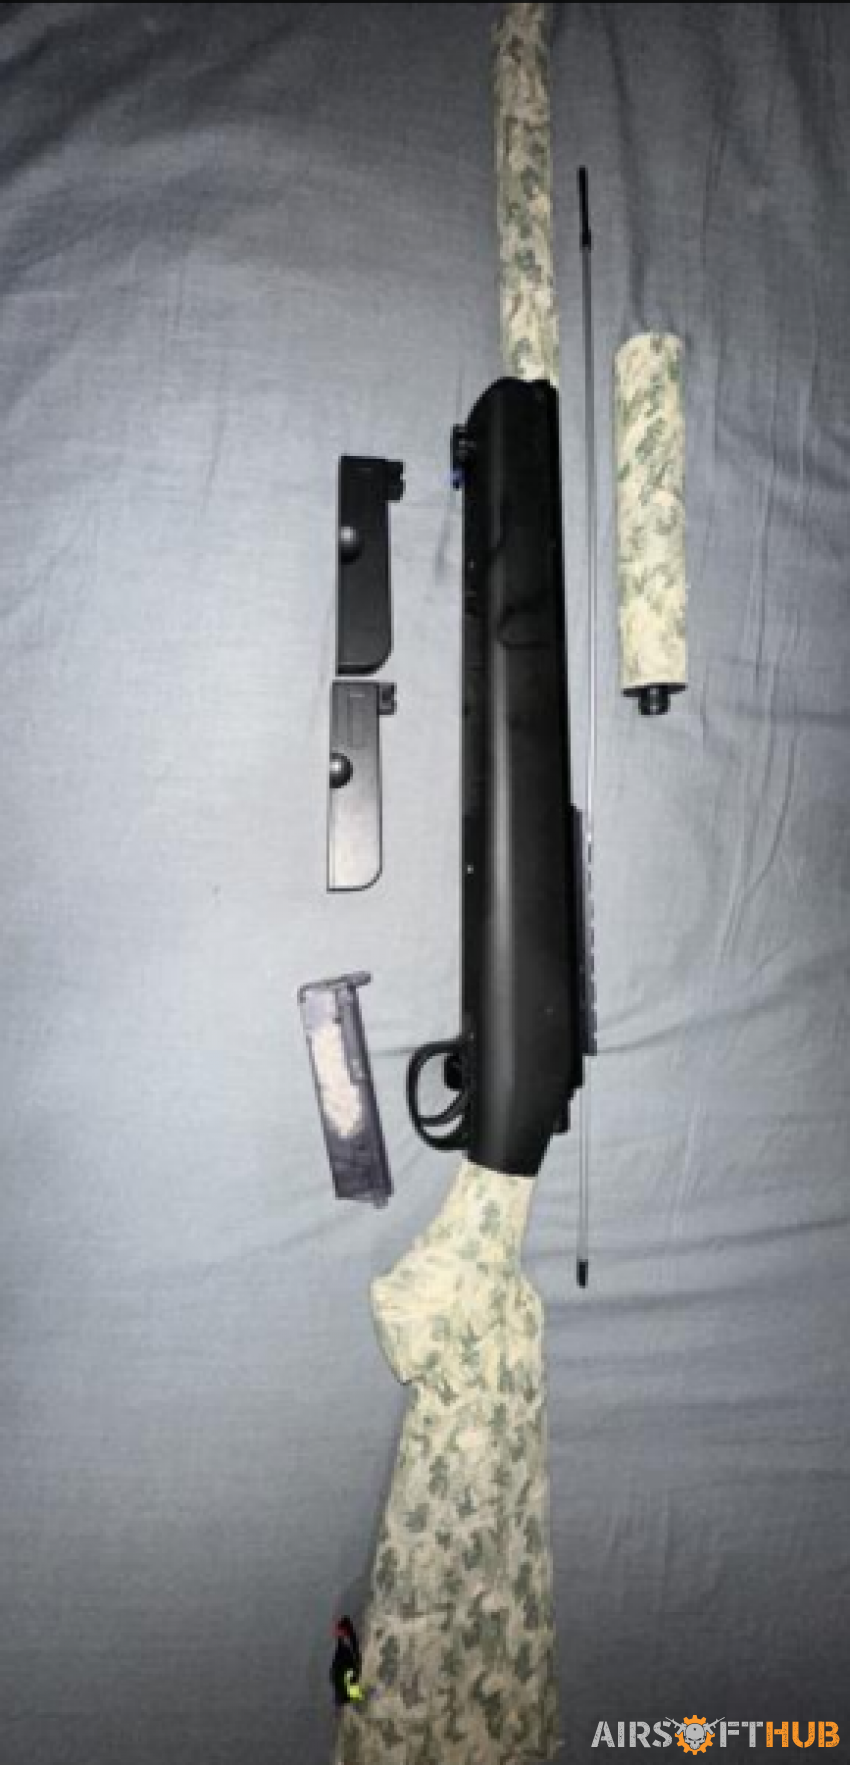 VSR-10 Gspec (upgraded) - Used airsoft equipment